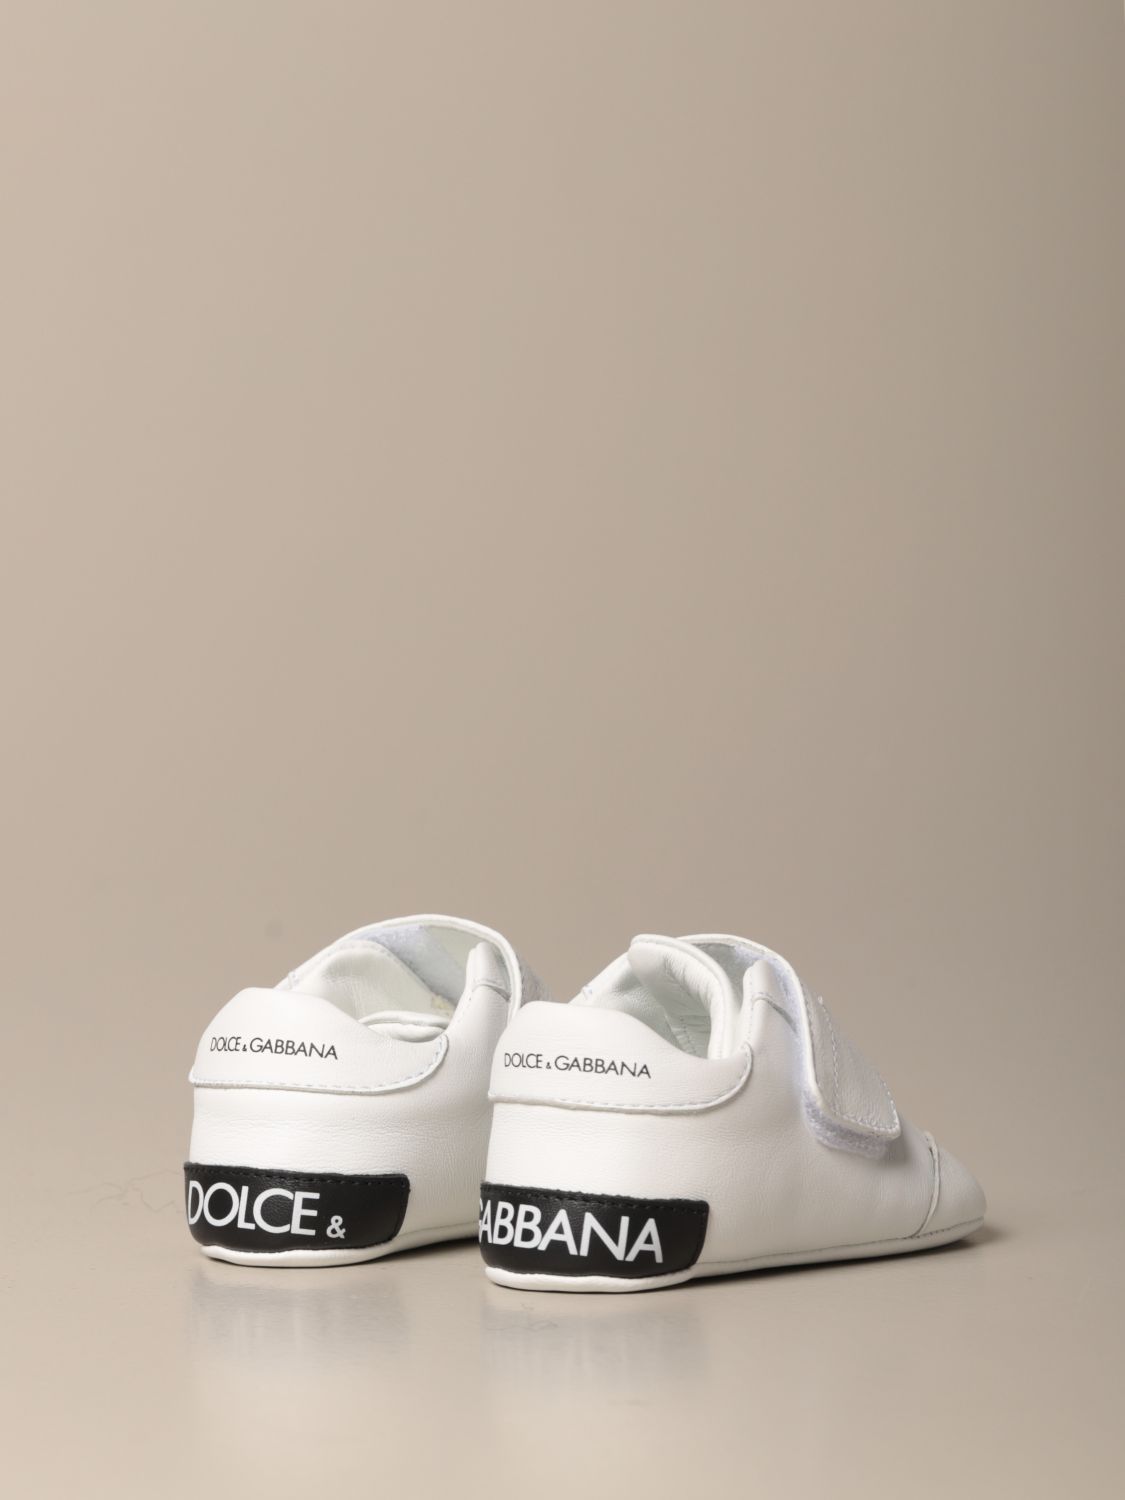 dolce and gabbana shoes